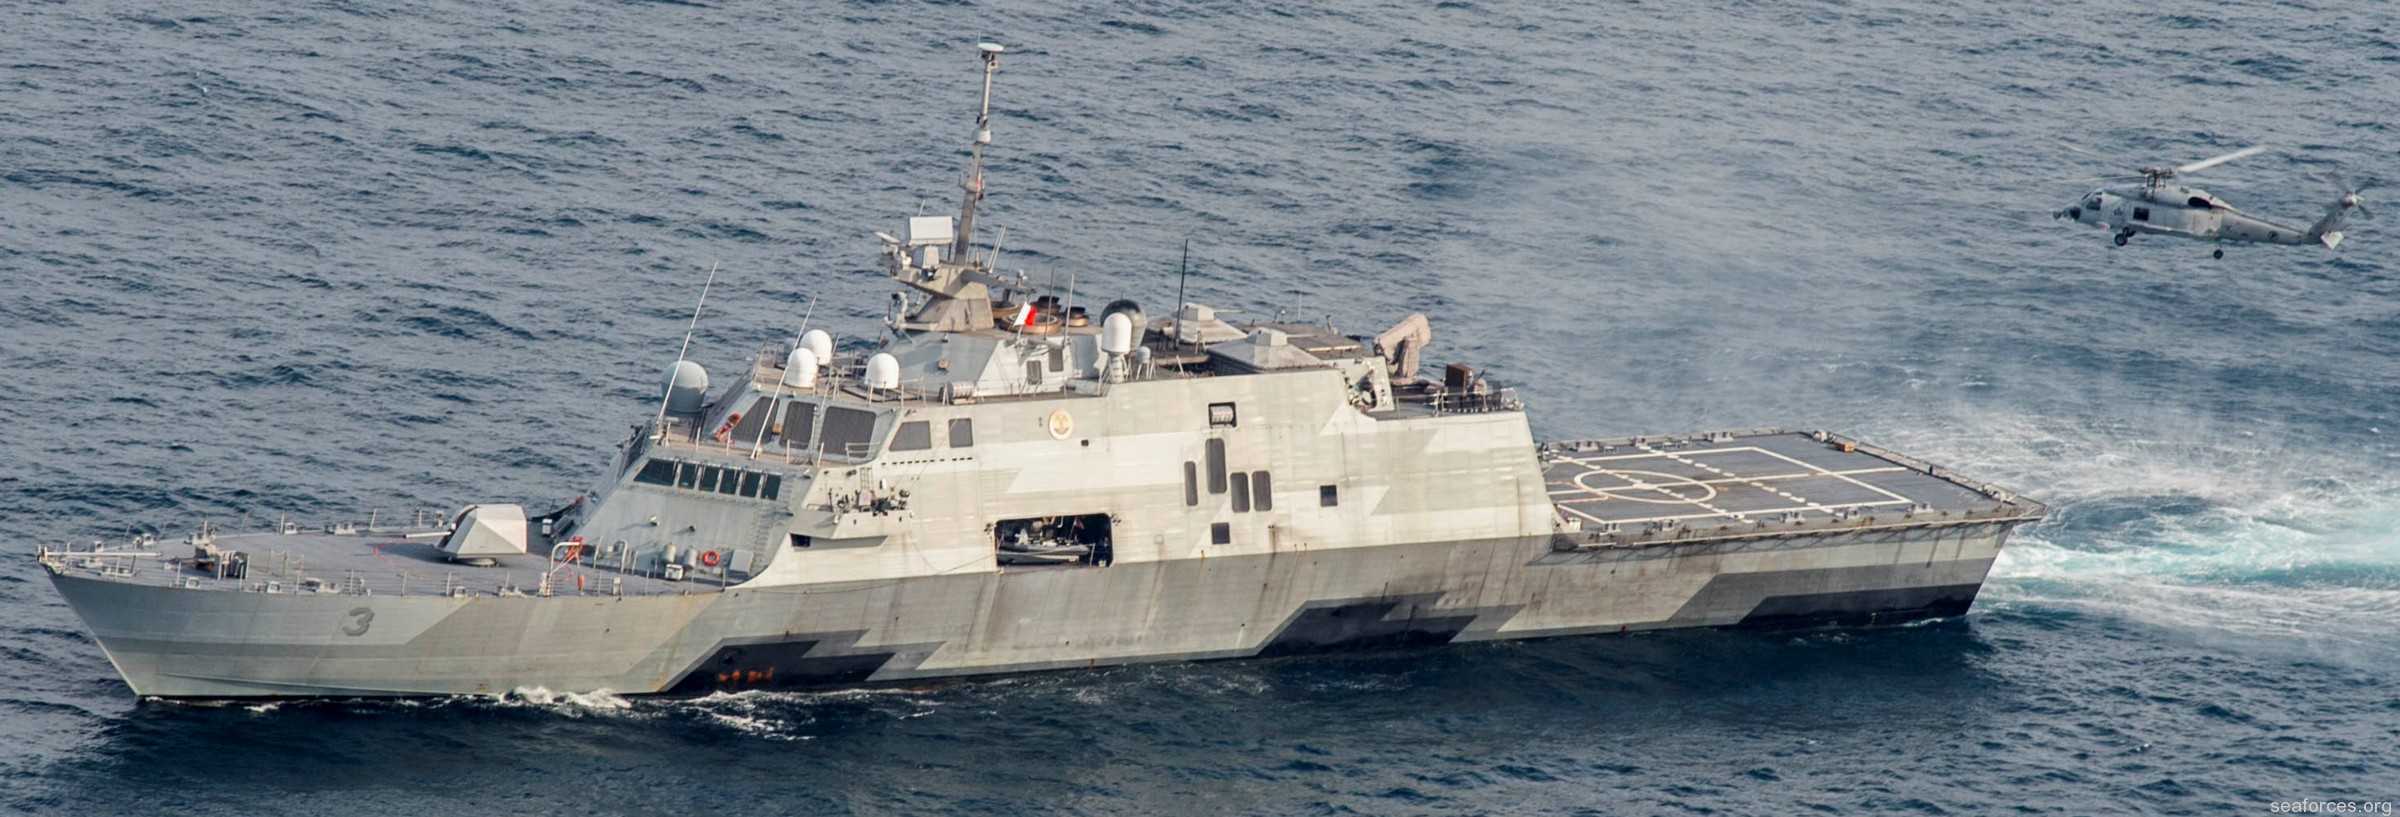 lcs-3 uss fort worth littoral combat ship freedom class us navy 07